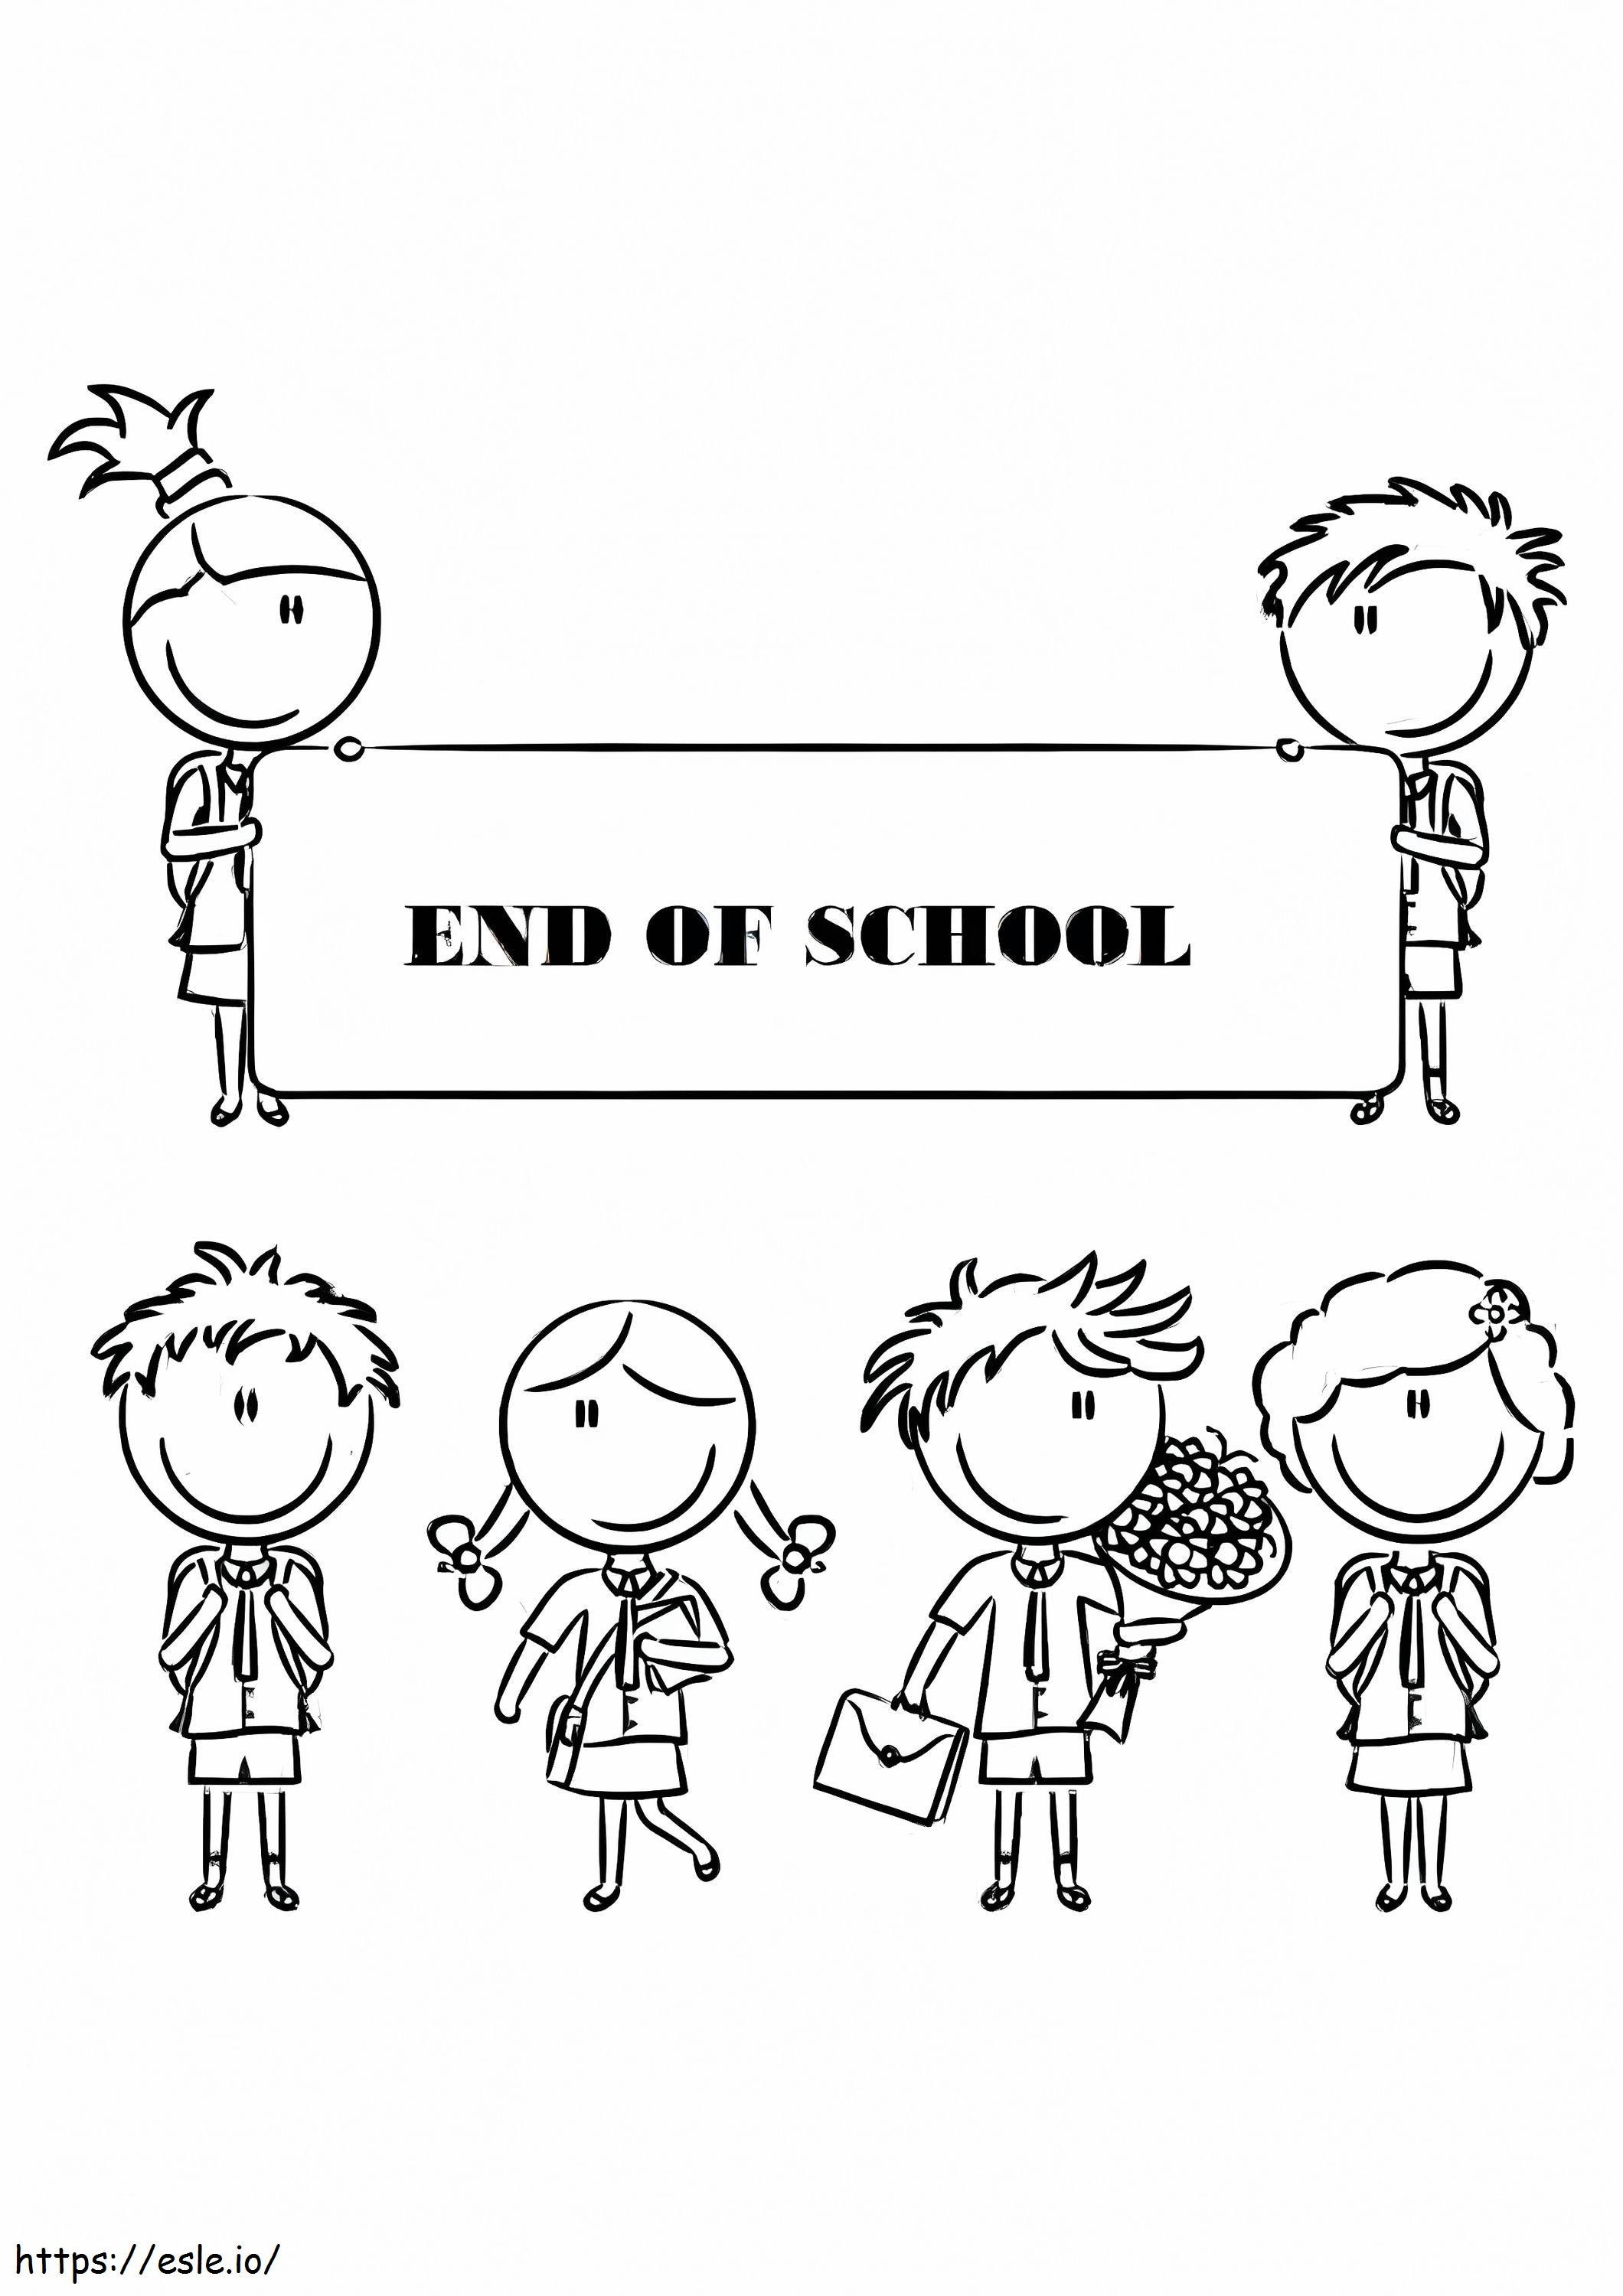 End Of School 1 coloring page